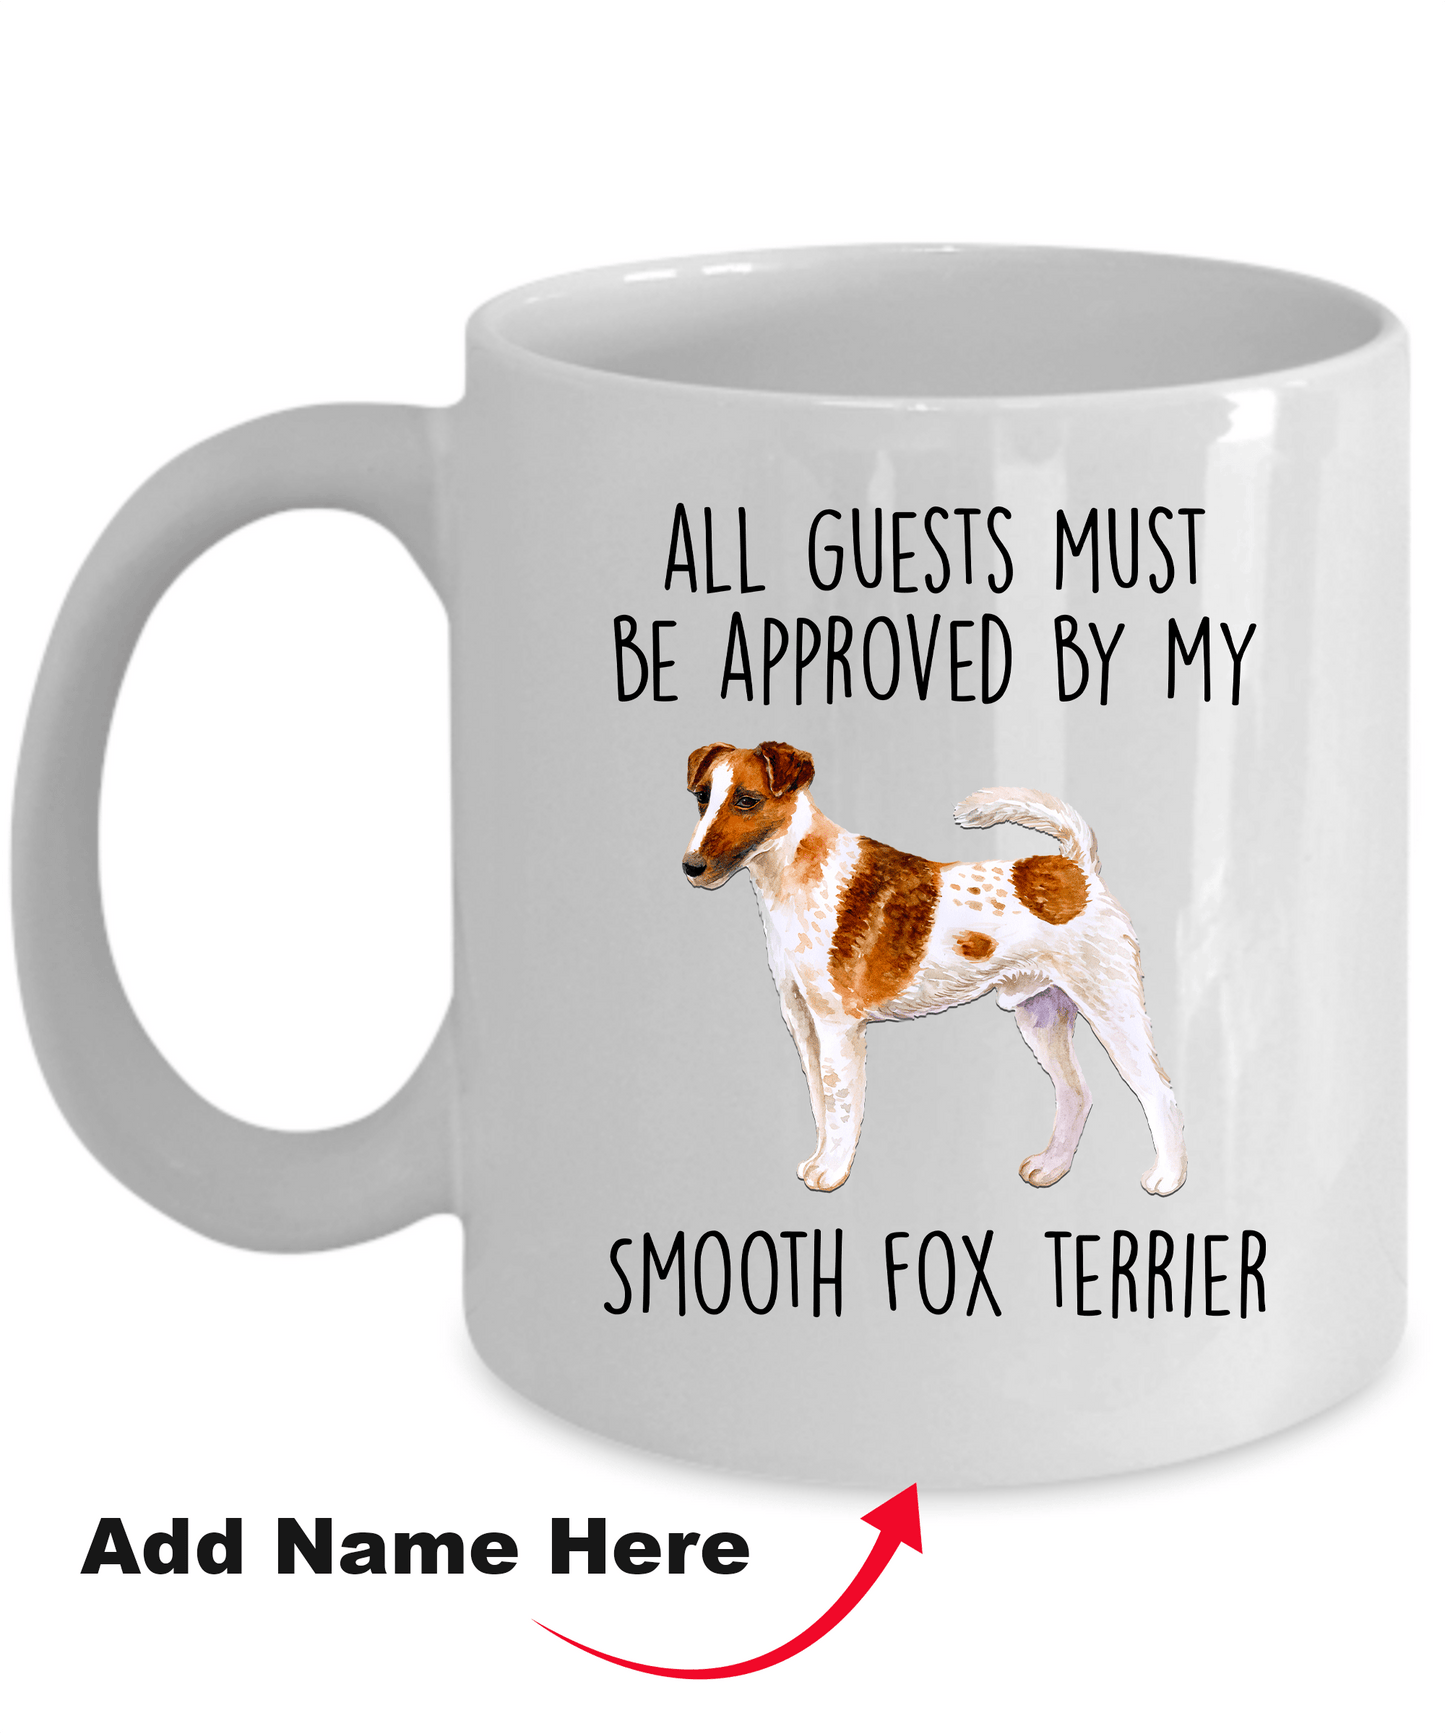 Funny Smooth Fox Terrier Dog Ceramic Coffee Mug - All Guests must be approved